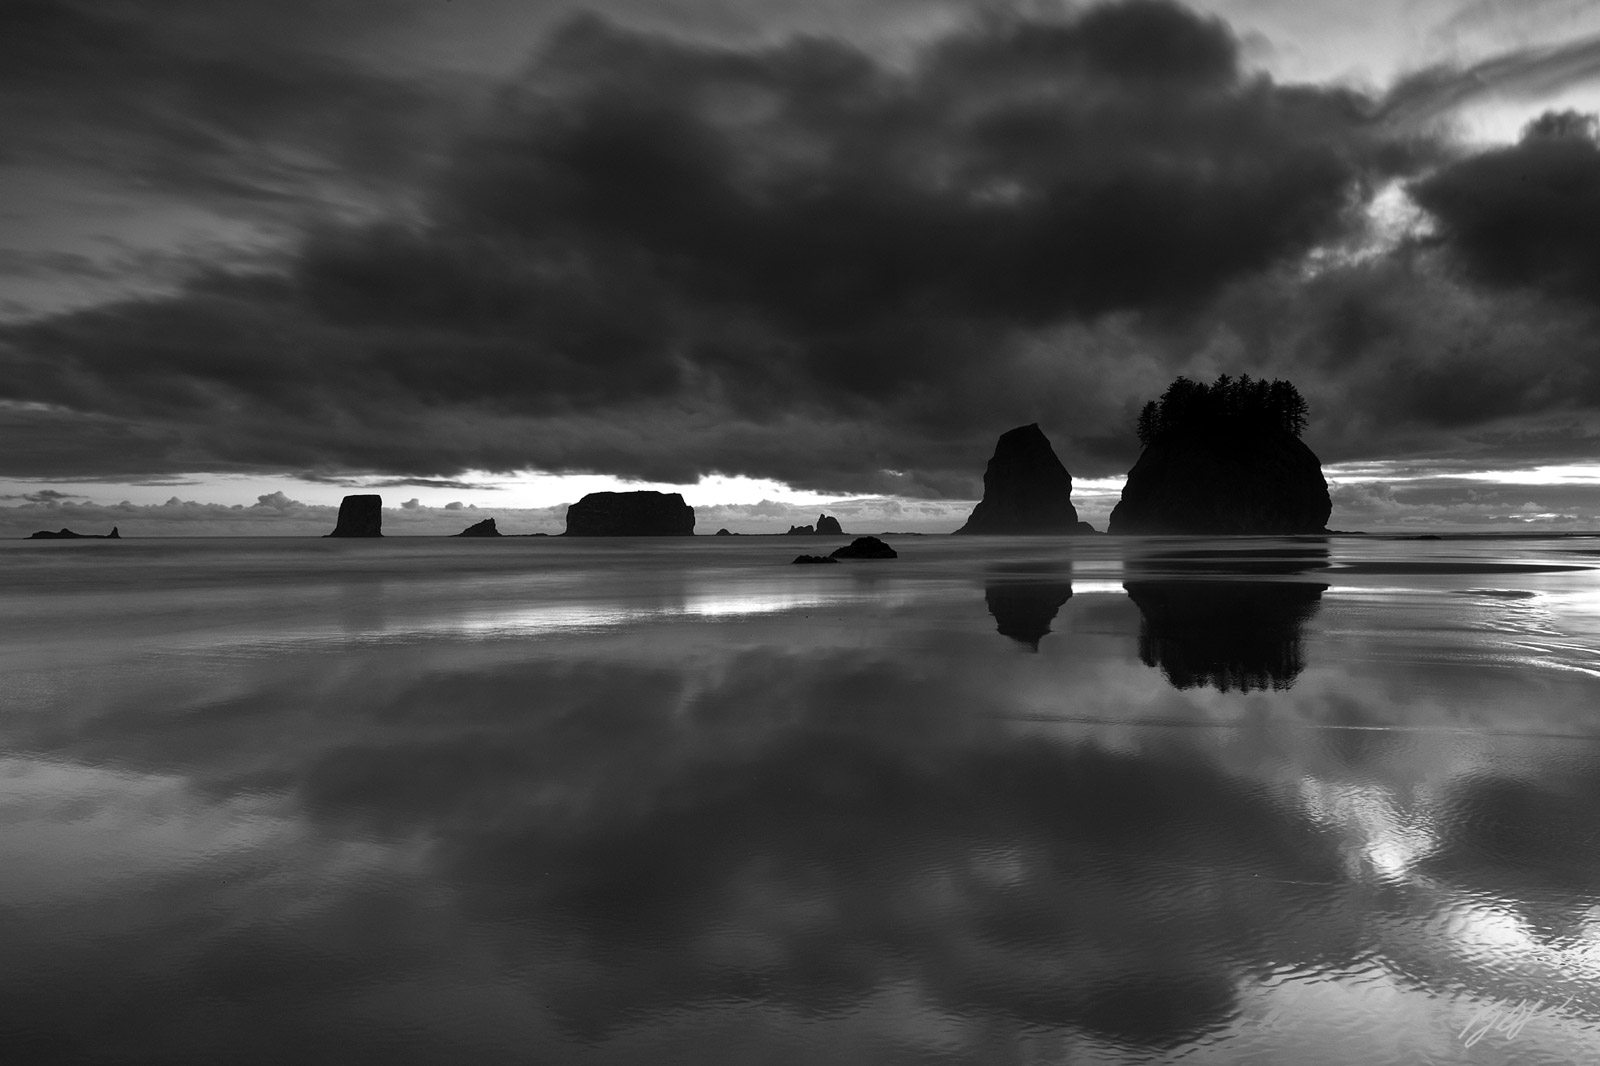 Sunset Reflection on Second Beach in Olympic National Park in Washington